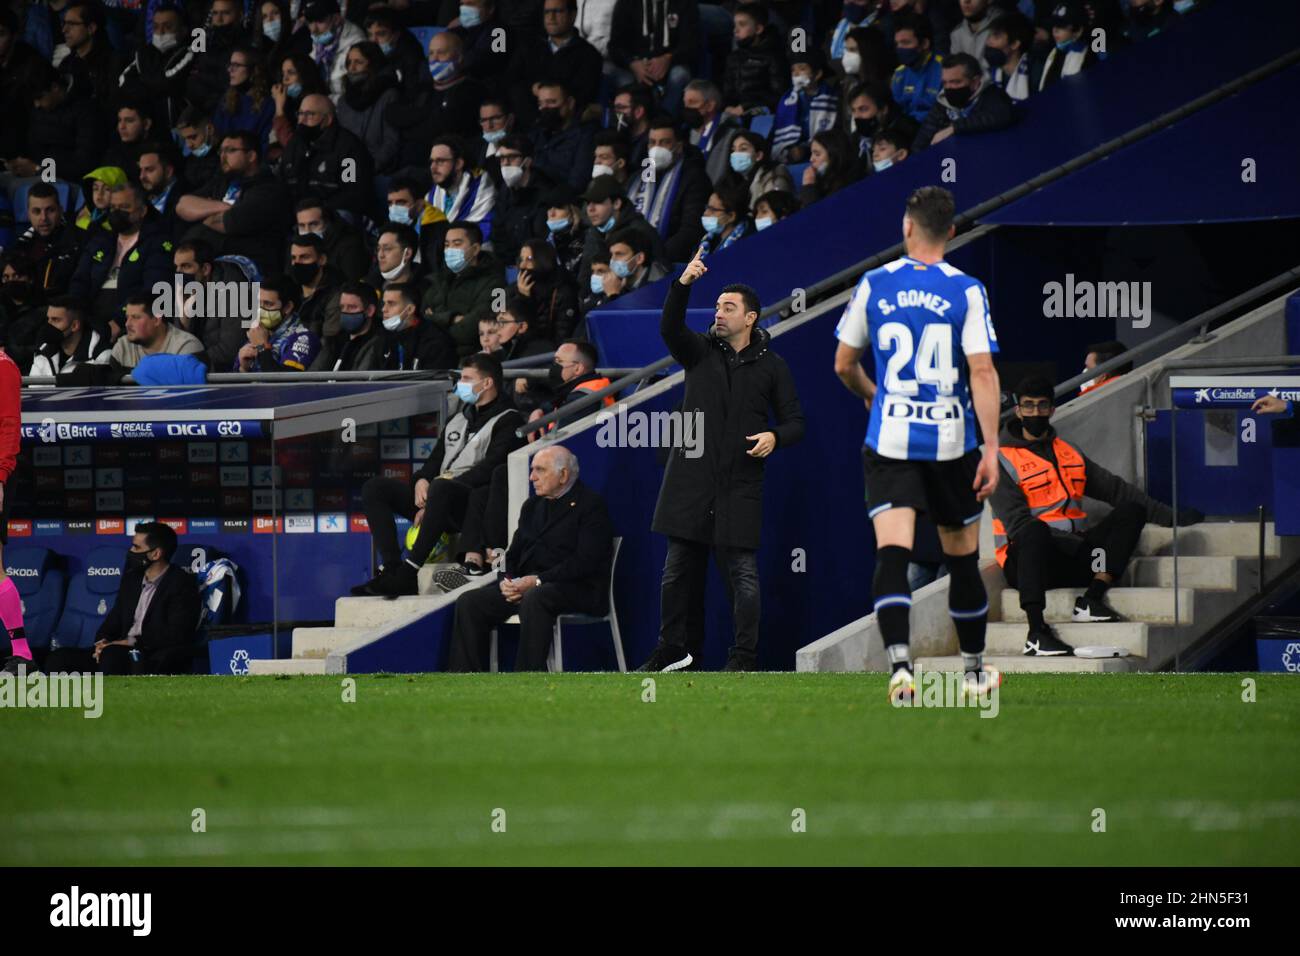 Barcelona, Spain. 13th Feb, 2022. BARCELONA - FEBRUARY 13: Manager Xavi Hernandez of Barcelona during the La Liga match between RCD Espanyol v Barcelona at RCDE Stadium on February 13, 2022 in Barcelona, Spain. (Photo by Sara Aribó/PxImages) Credit: Px Images/Alamy Live News Stock Photo